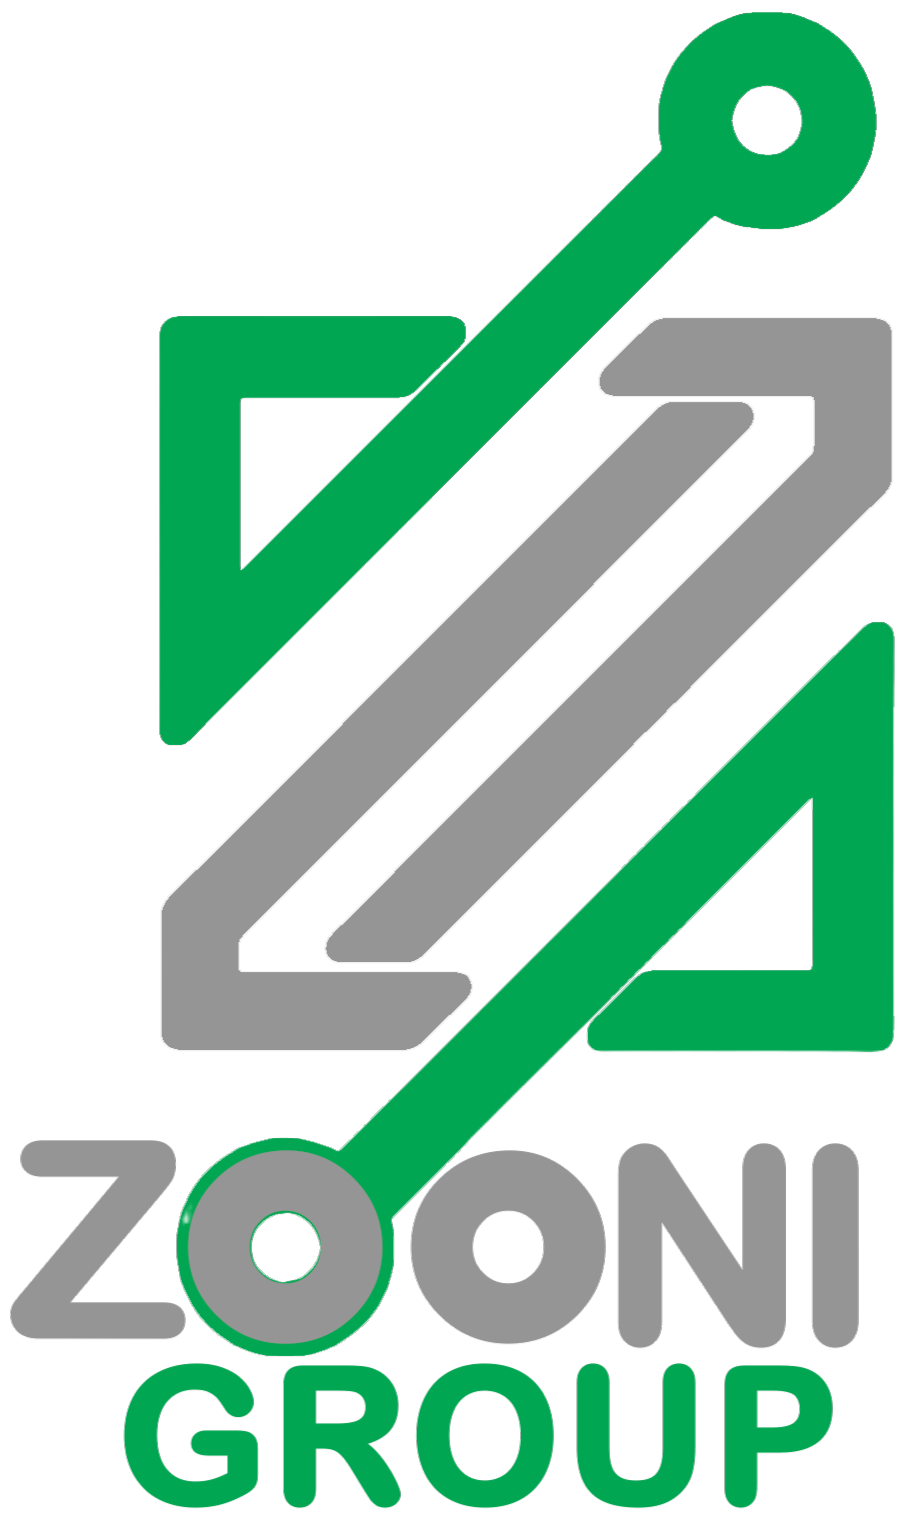 Zooni Group